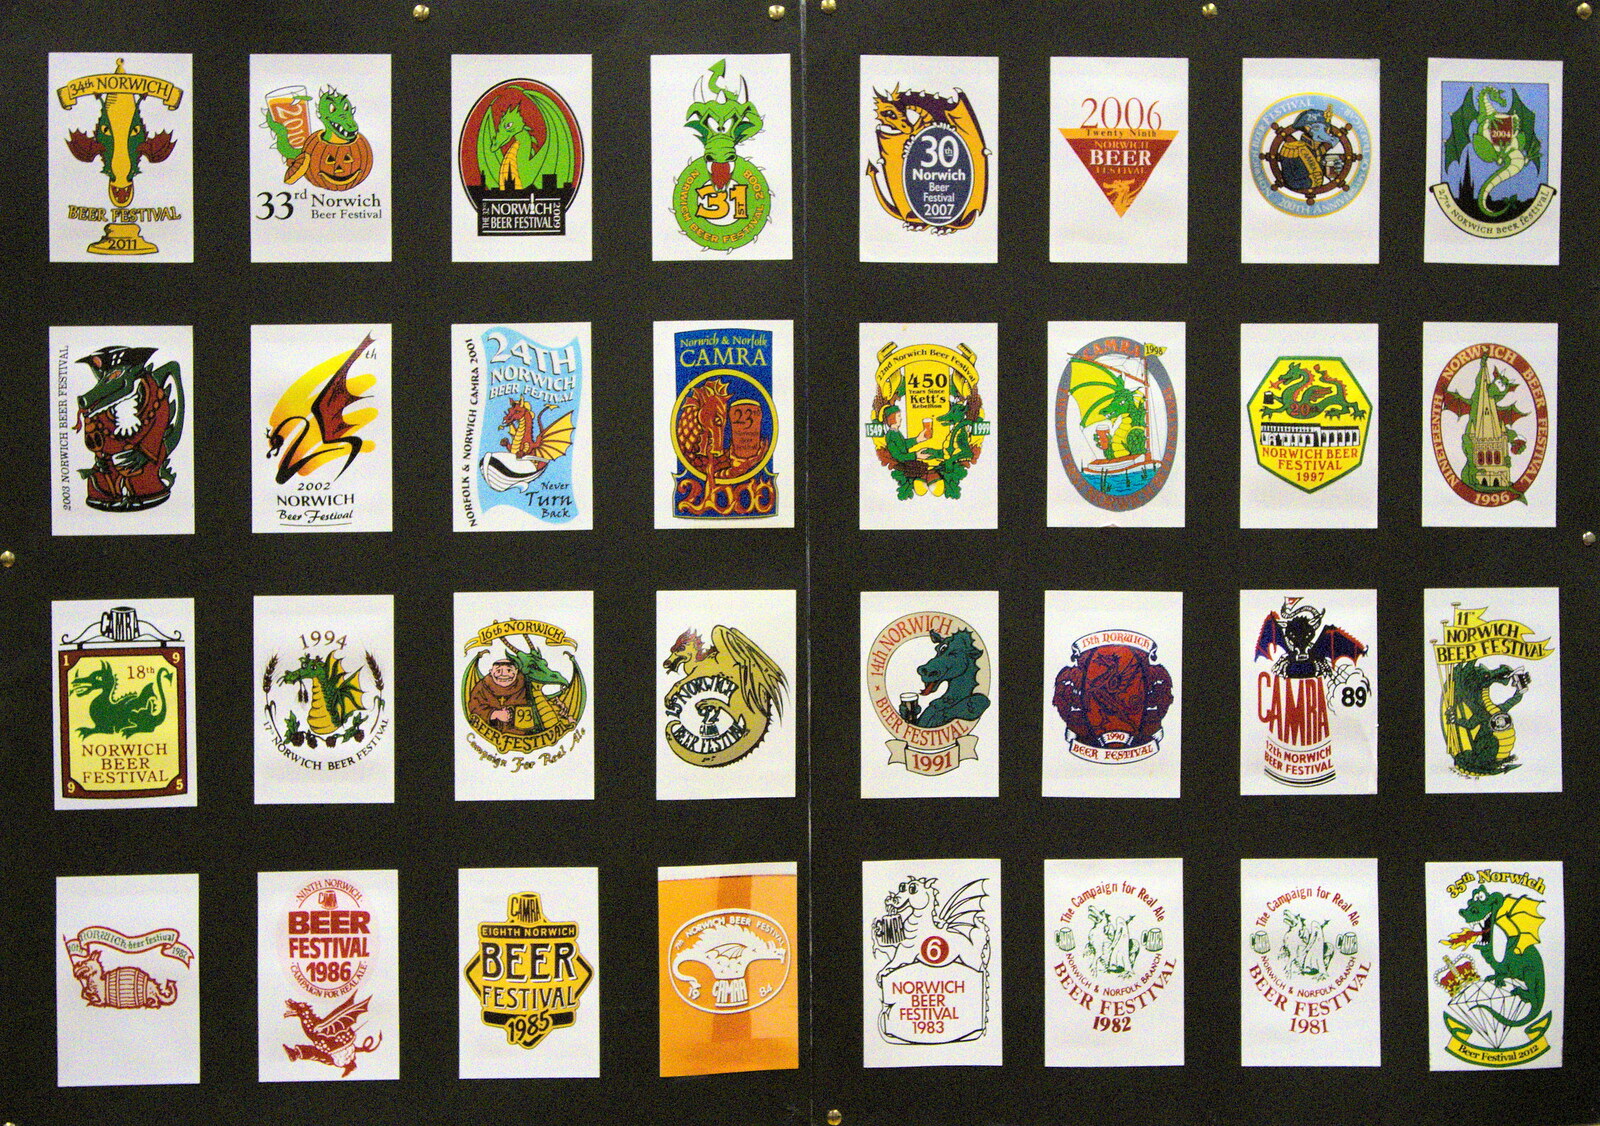 A nice poster of the last 32 beer-glass designs from The 35th Norwich Beer Festival, St. Andrew's Hall, Norwich - 31st October 2012